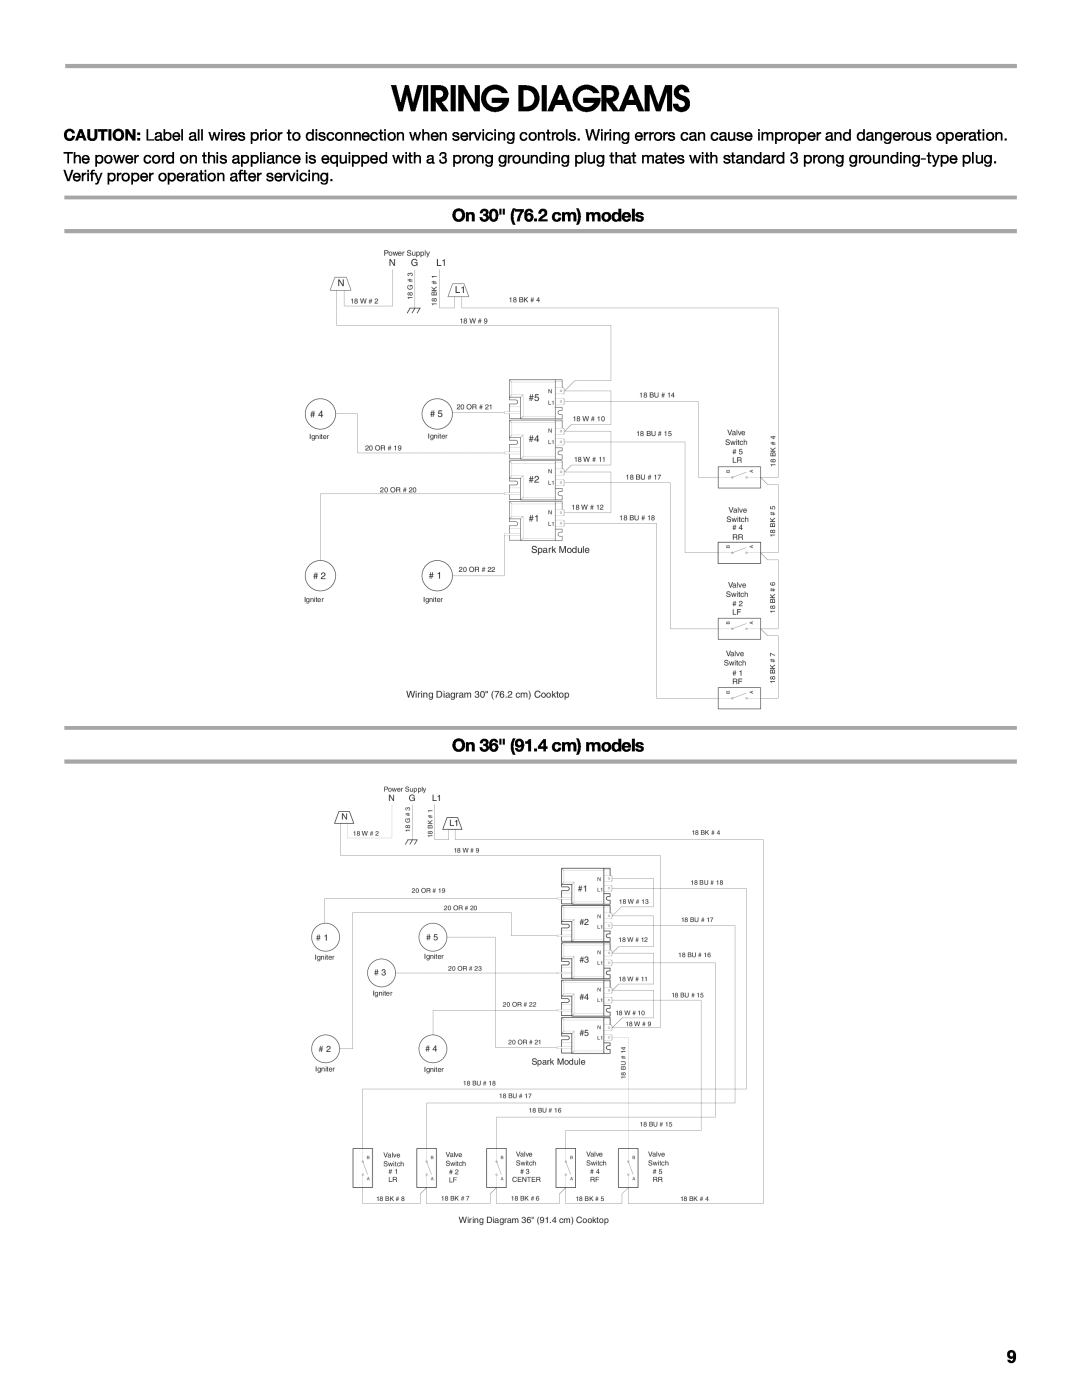 Whirlpool 9761893B installation instructions Wiring Diagrams, On 30 76.2 cm models, On 36 91.4 cm models 